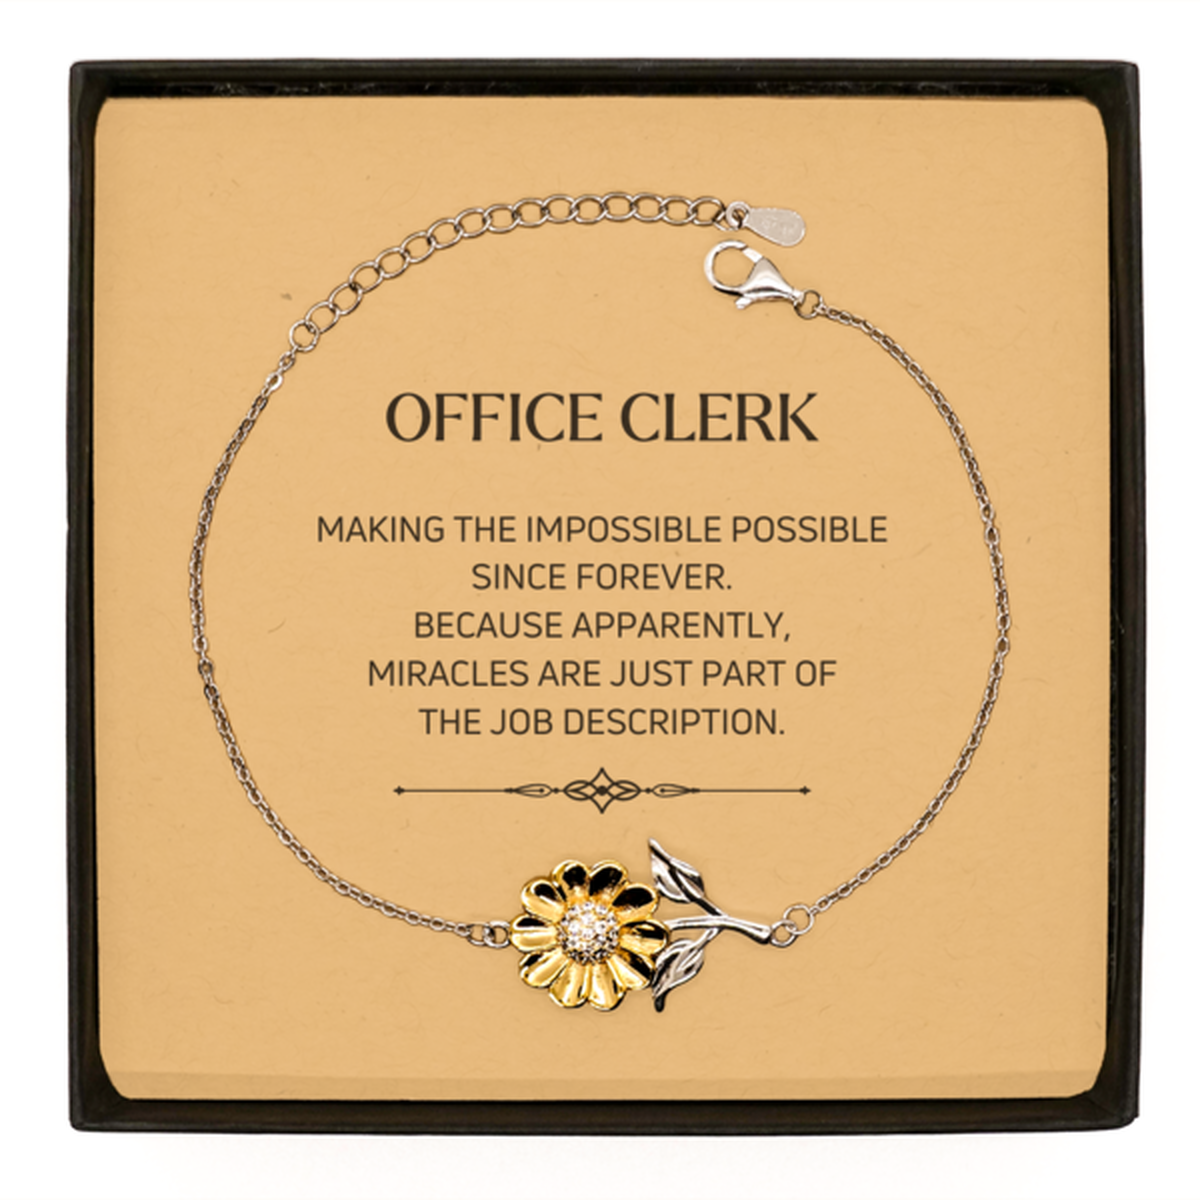 Funny Office Clerk Gifts, Miracles are just part of the job description, Inspirational Birthday Sunflower Bracelet For Office Clerk, Men, Women, Coworkers, Friends, Boss